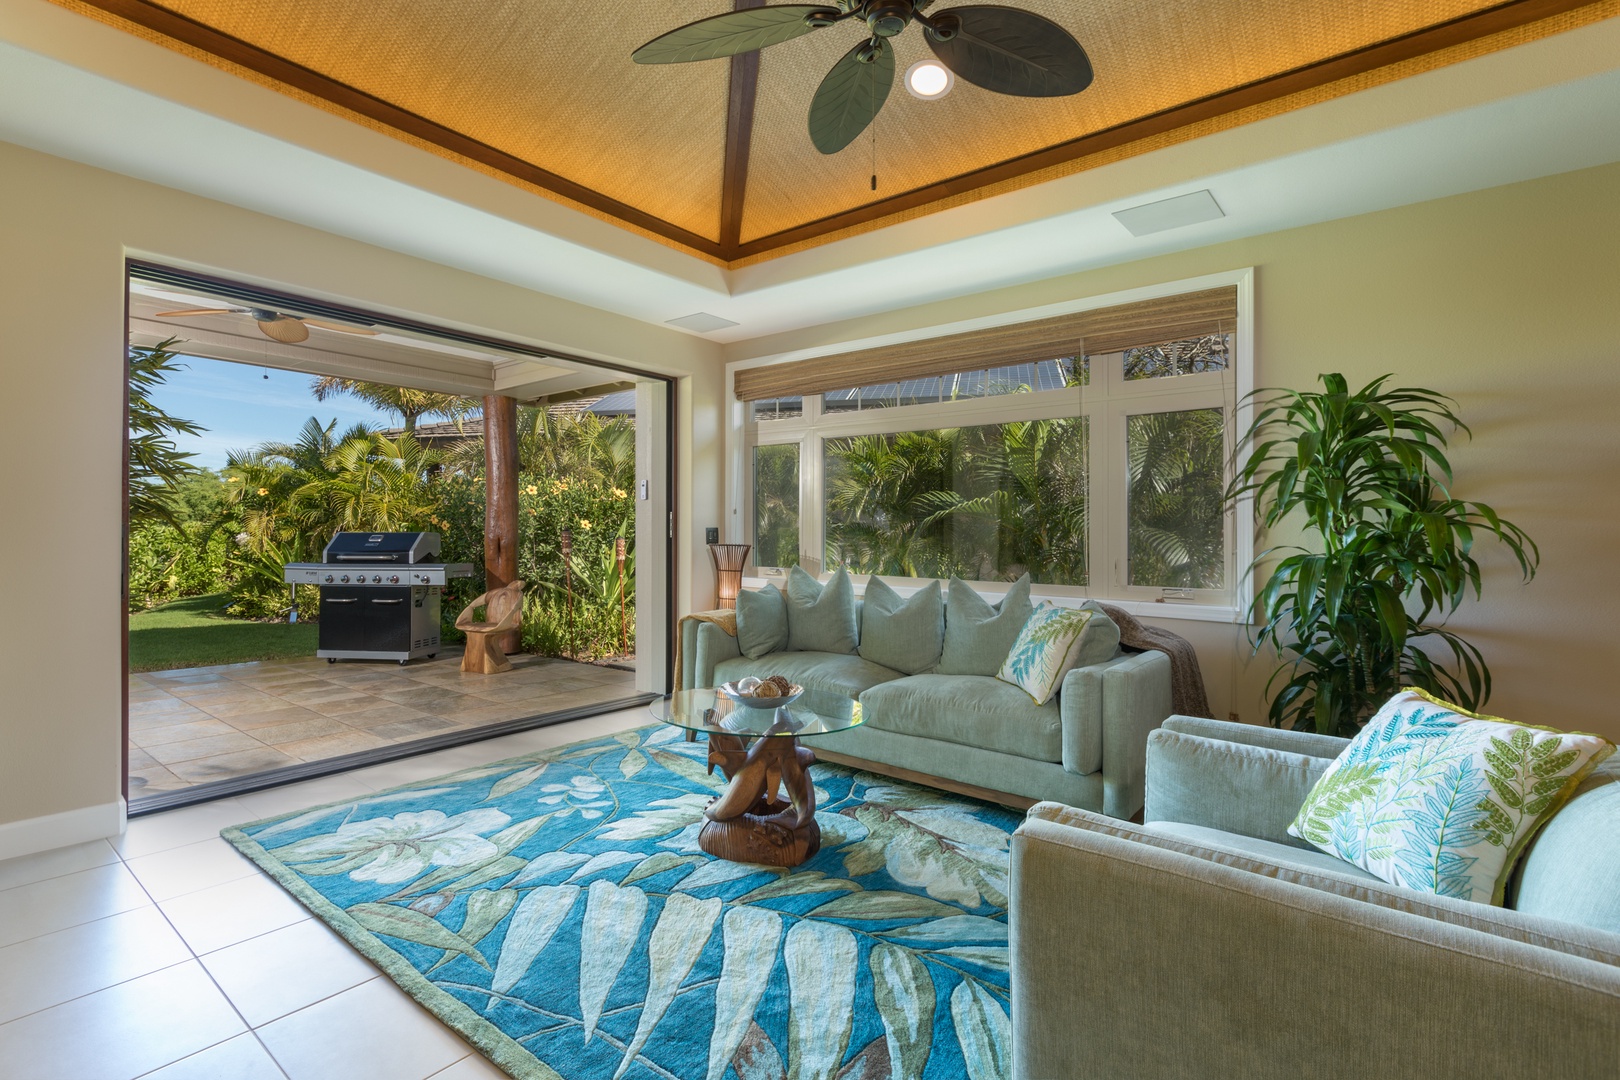 Kamuela Vacation Rentals, Mauna Lani KaMilo #407 - The welcoming living space opens to a covered lanai.